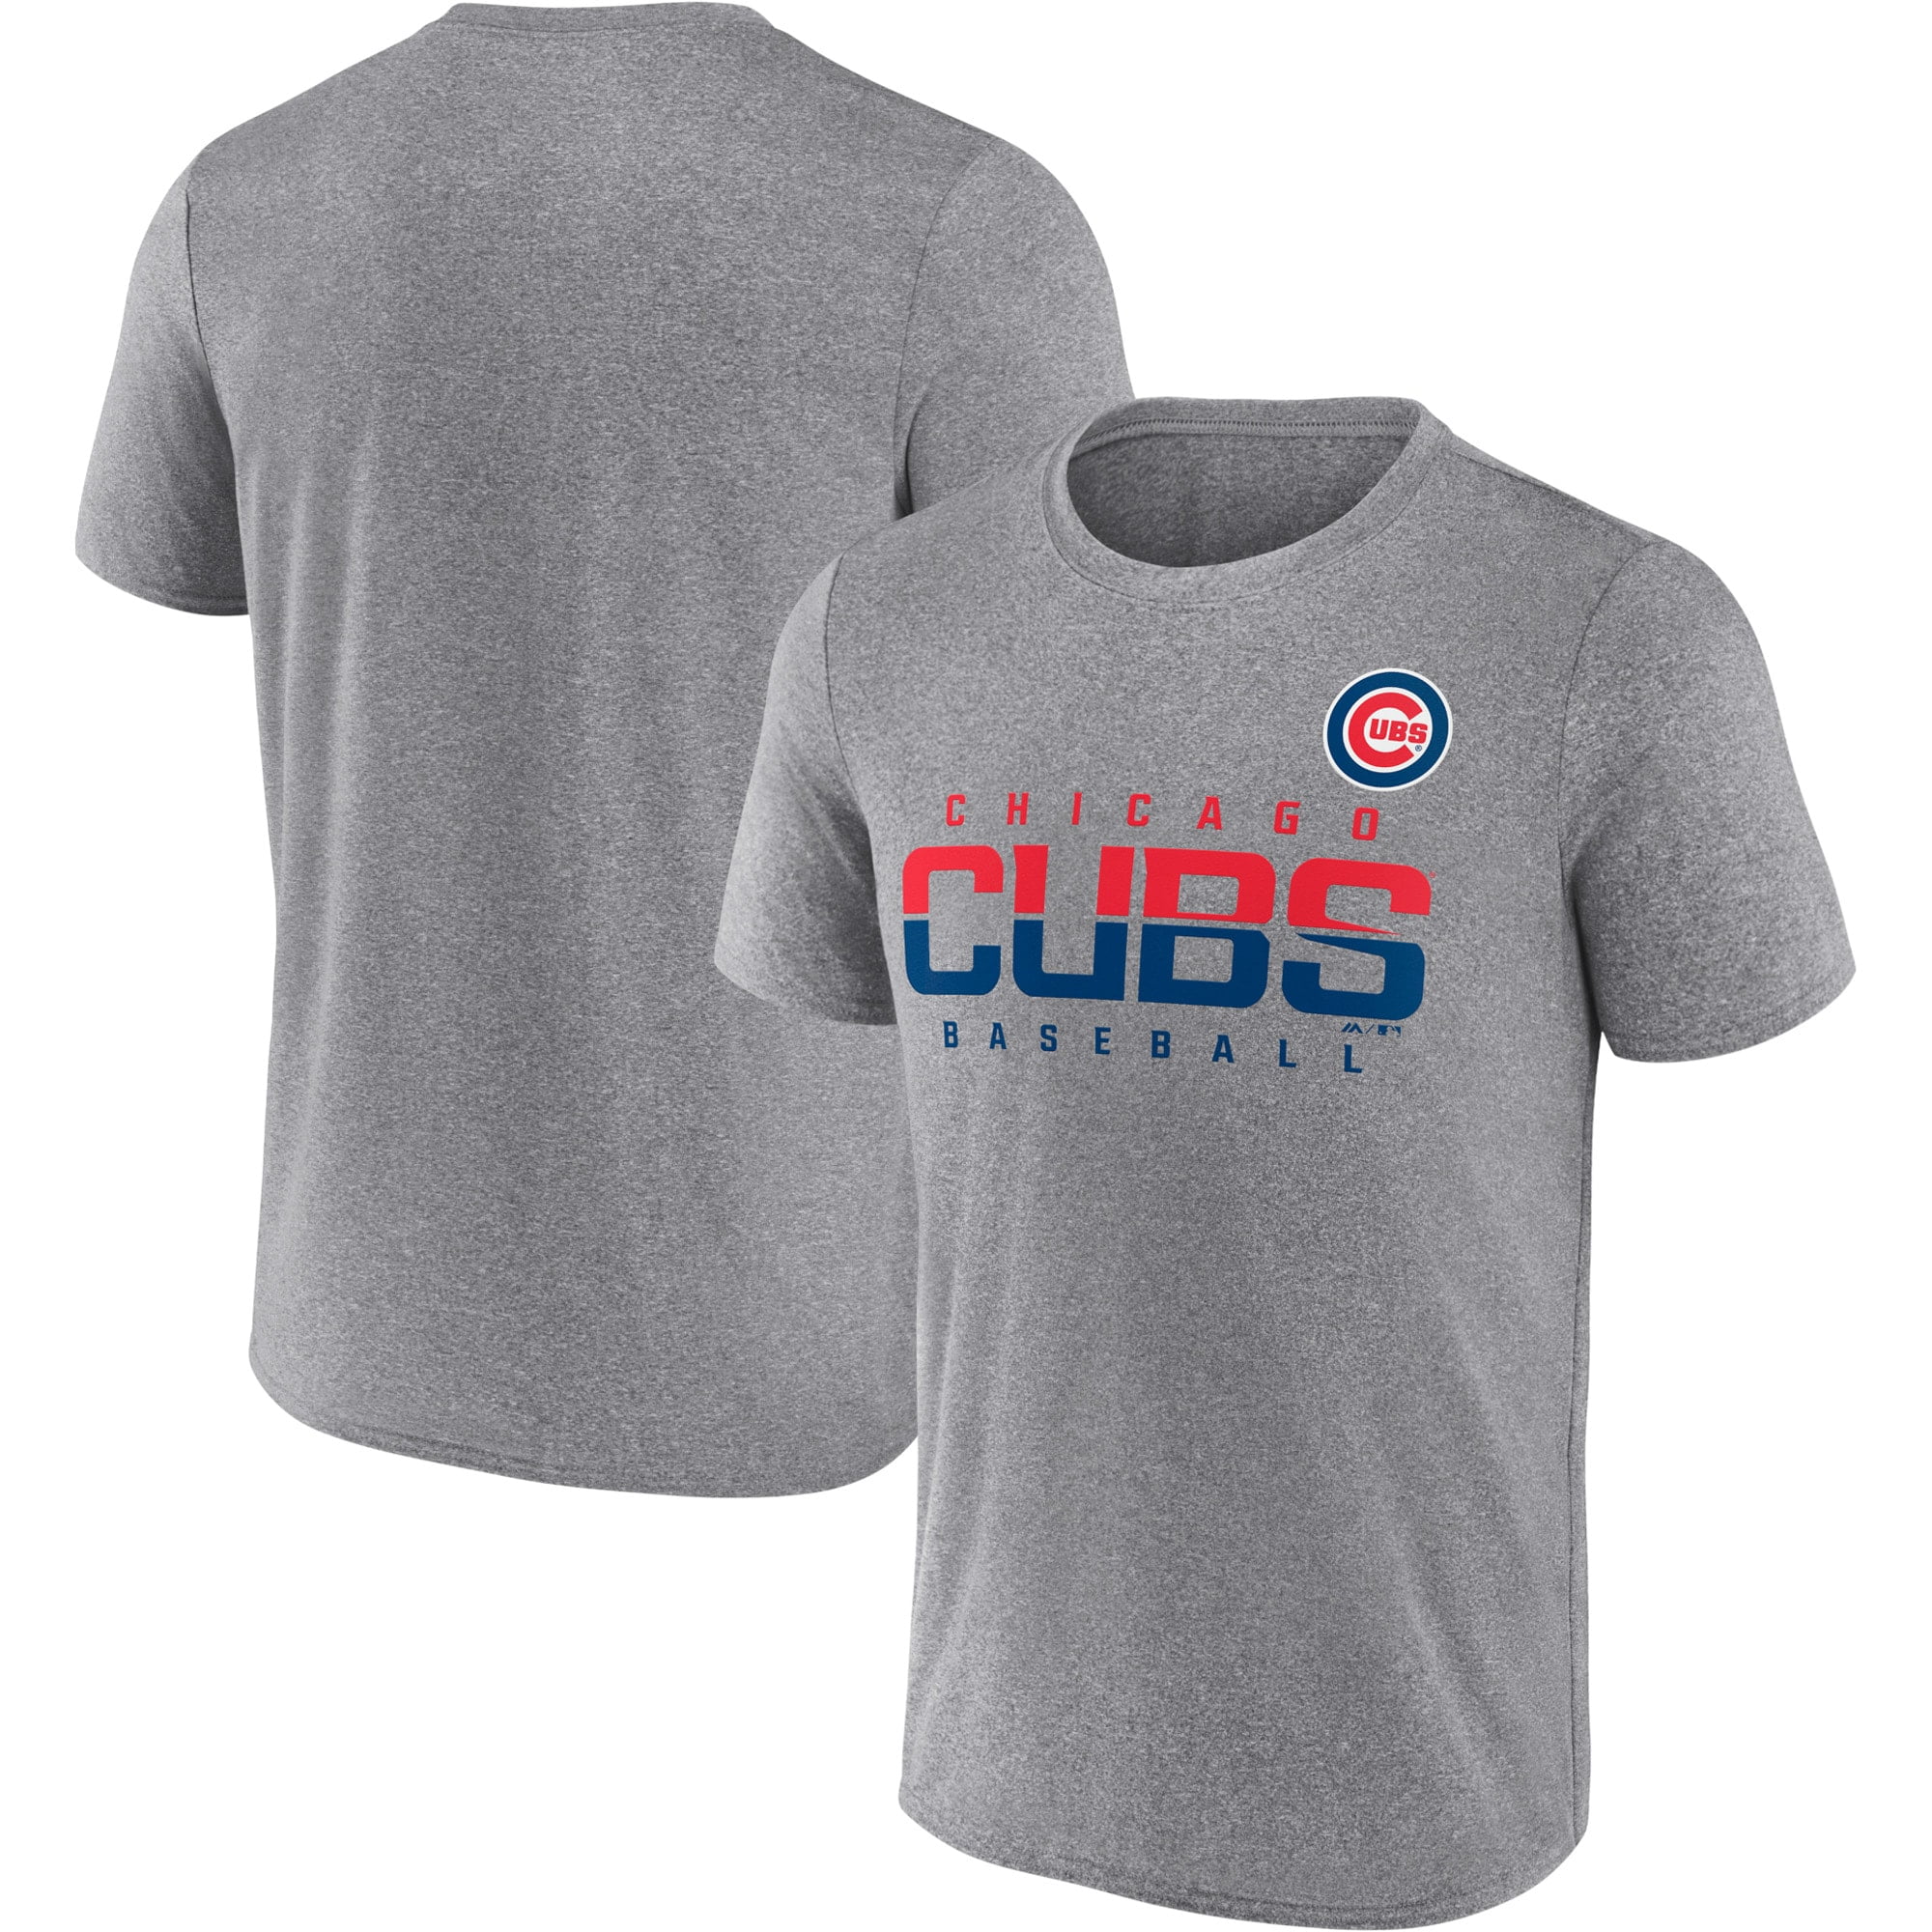 Men's Majestic Heathered Gray Chicago Cubs Earn It T-Shirt